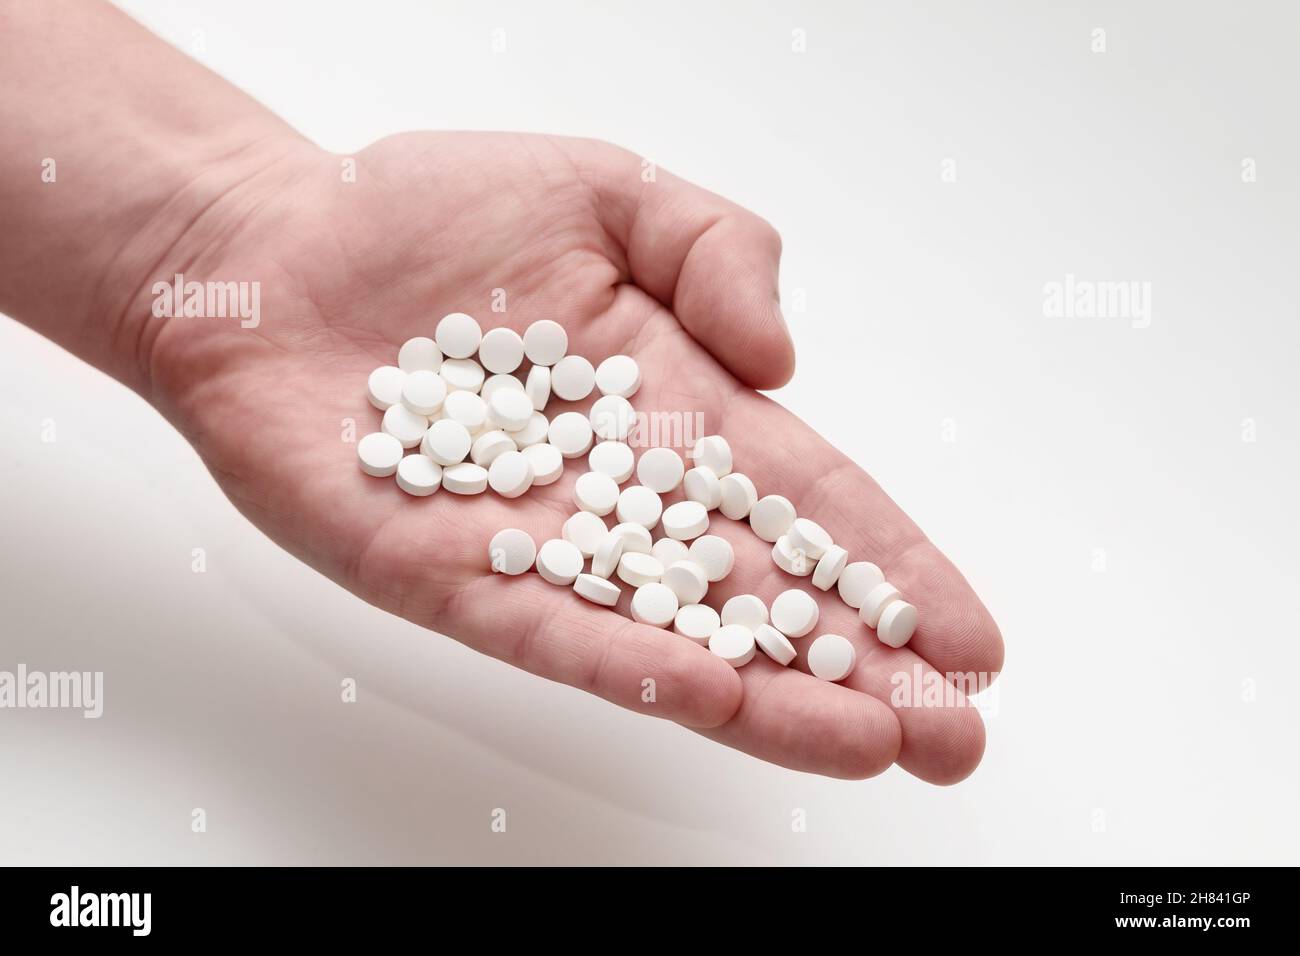 A lot of white round pills in a hand. Vitamin pills. Stock Photo